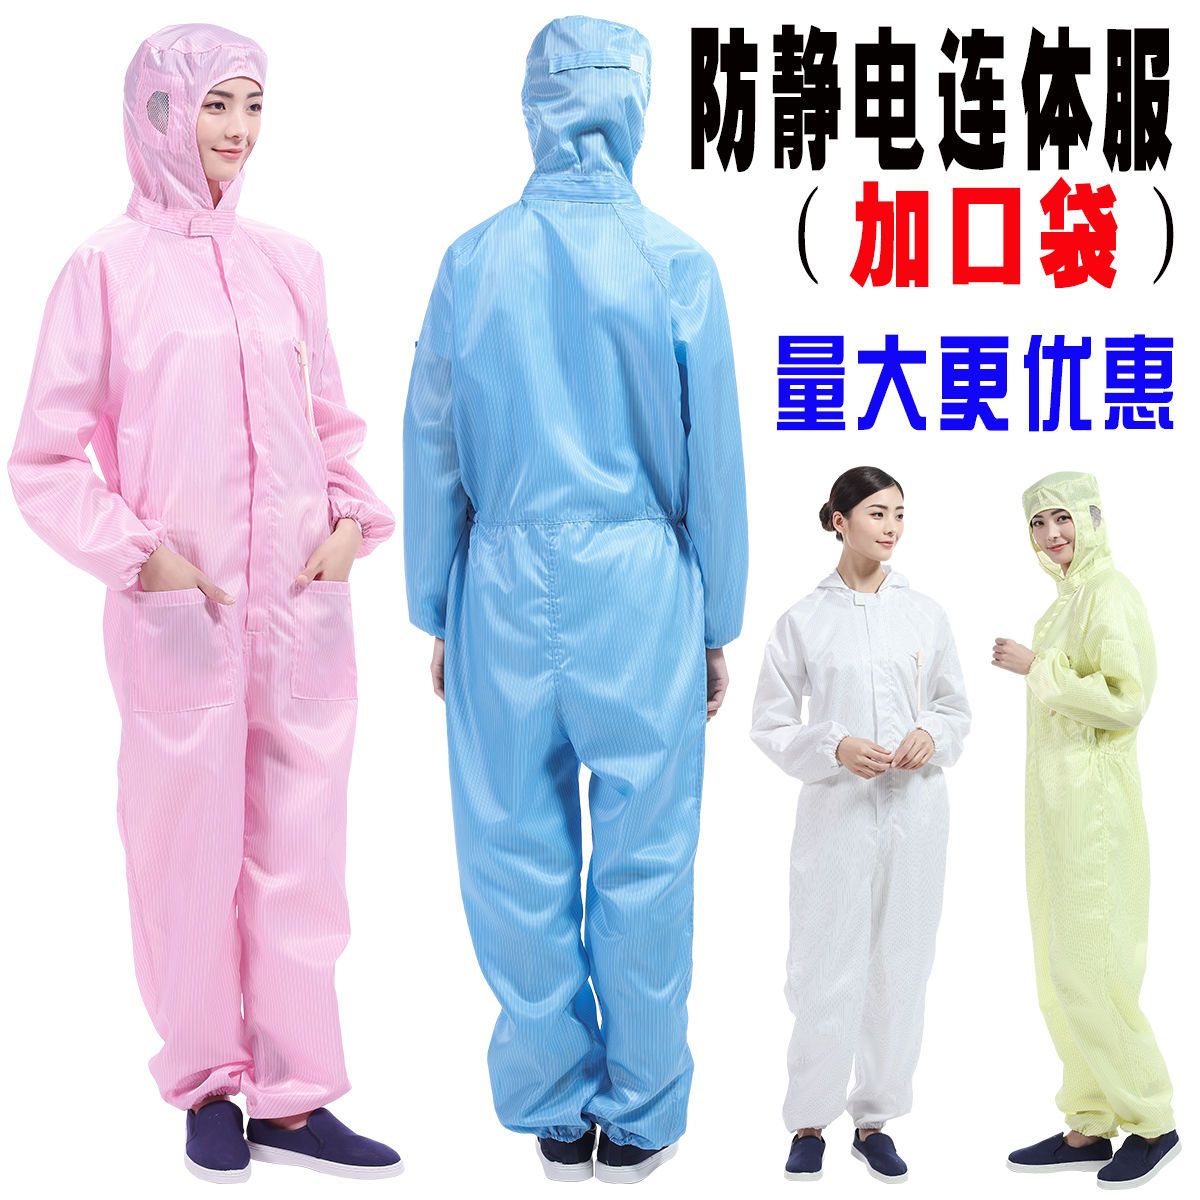 Antistatic hooded one-piece suit dust-free clothing spray paint protective clothing food clean clothing dust proof clothing male electrostatic clothing female